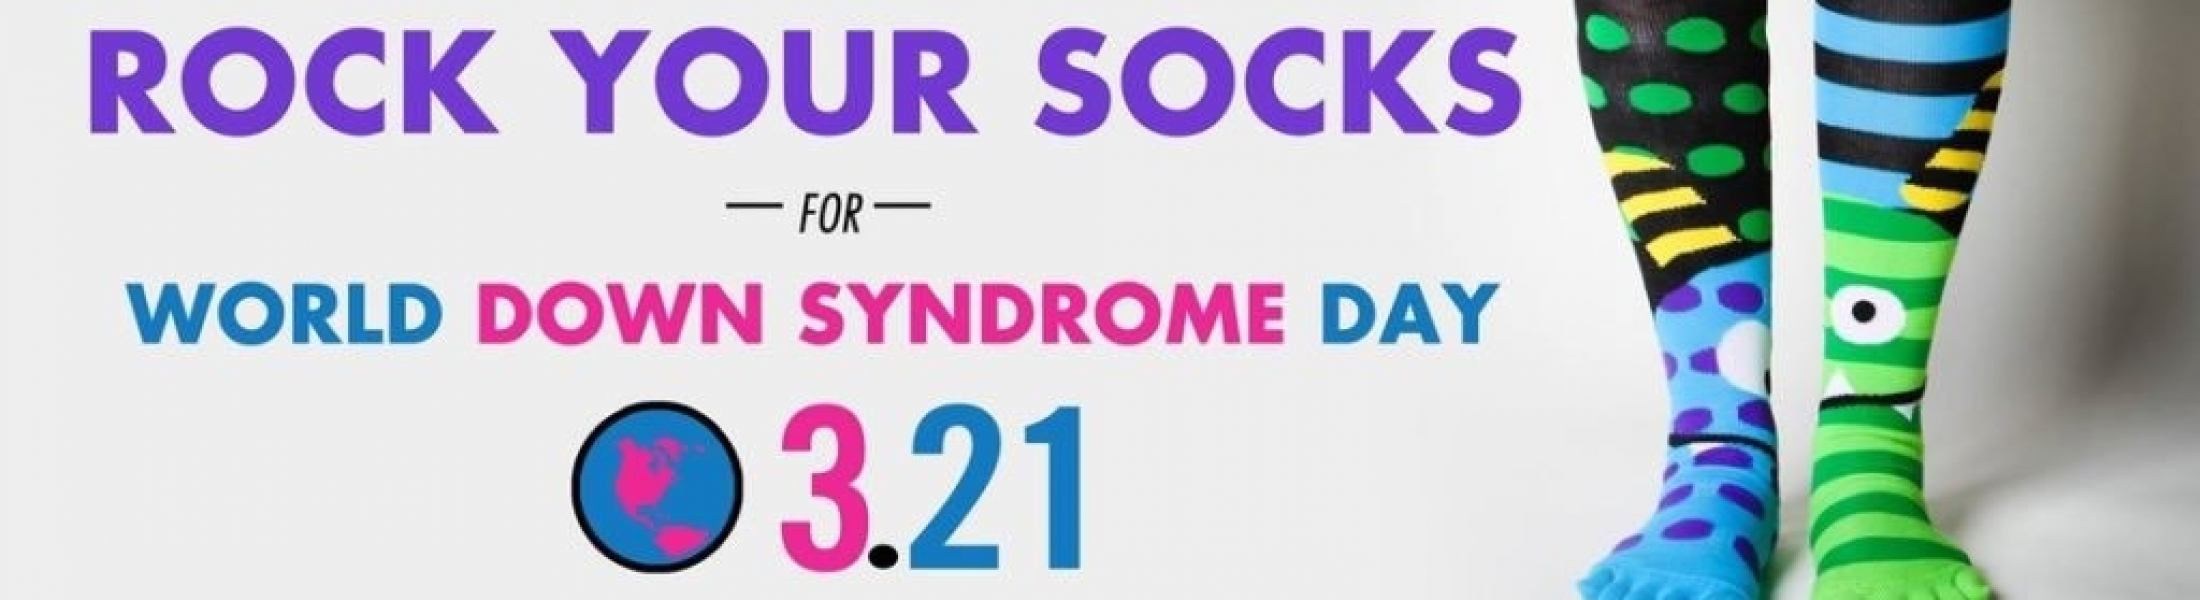 Rock your Socks for World Down Syndrome Day Pacekids